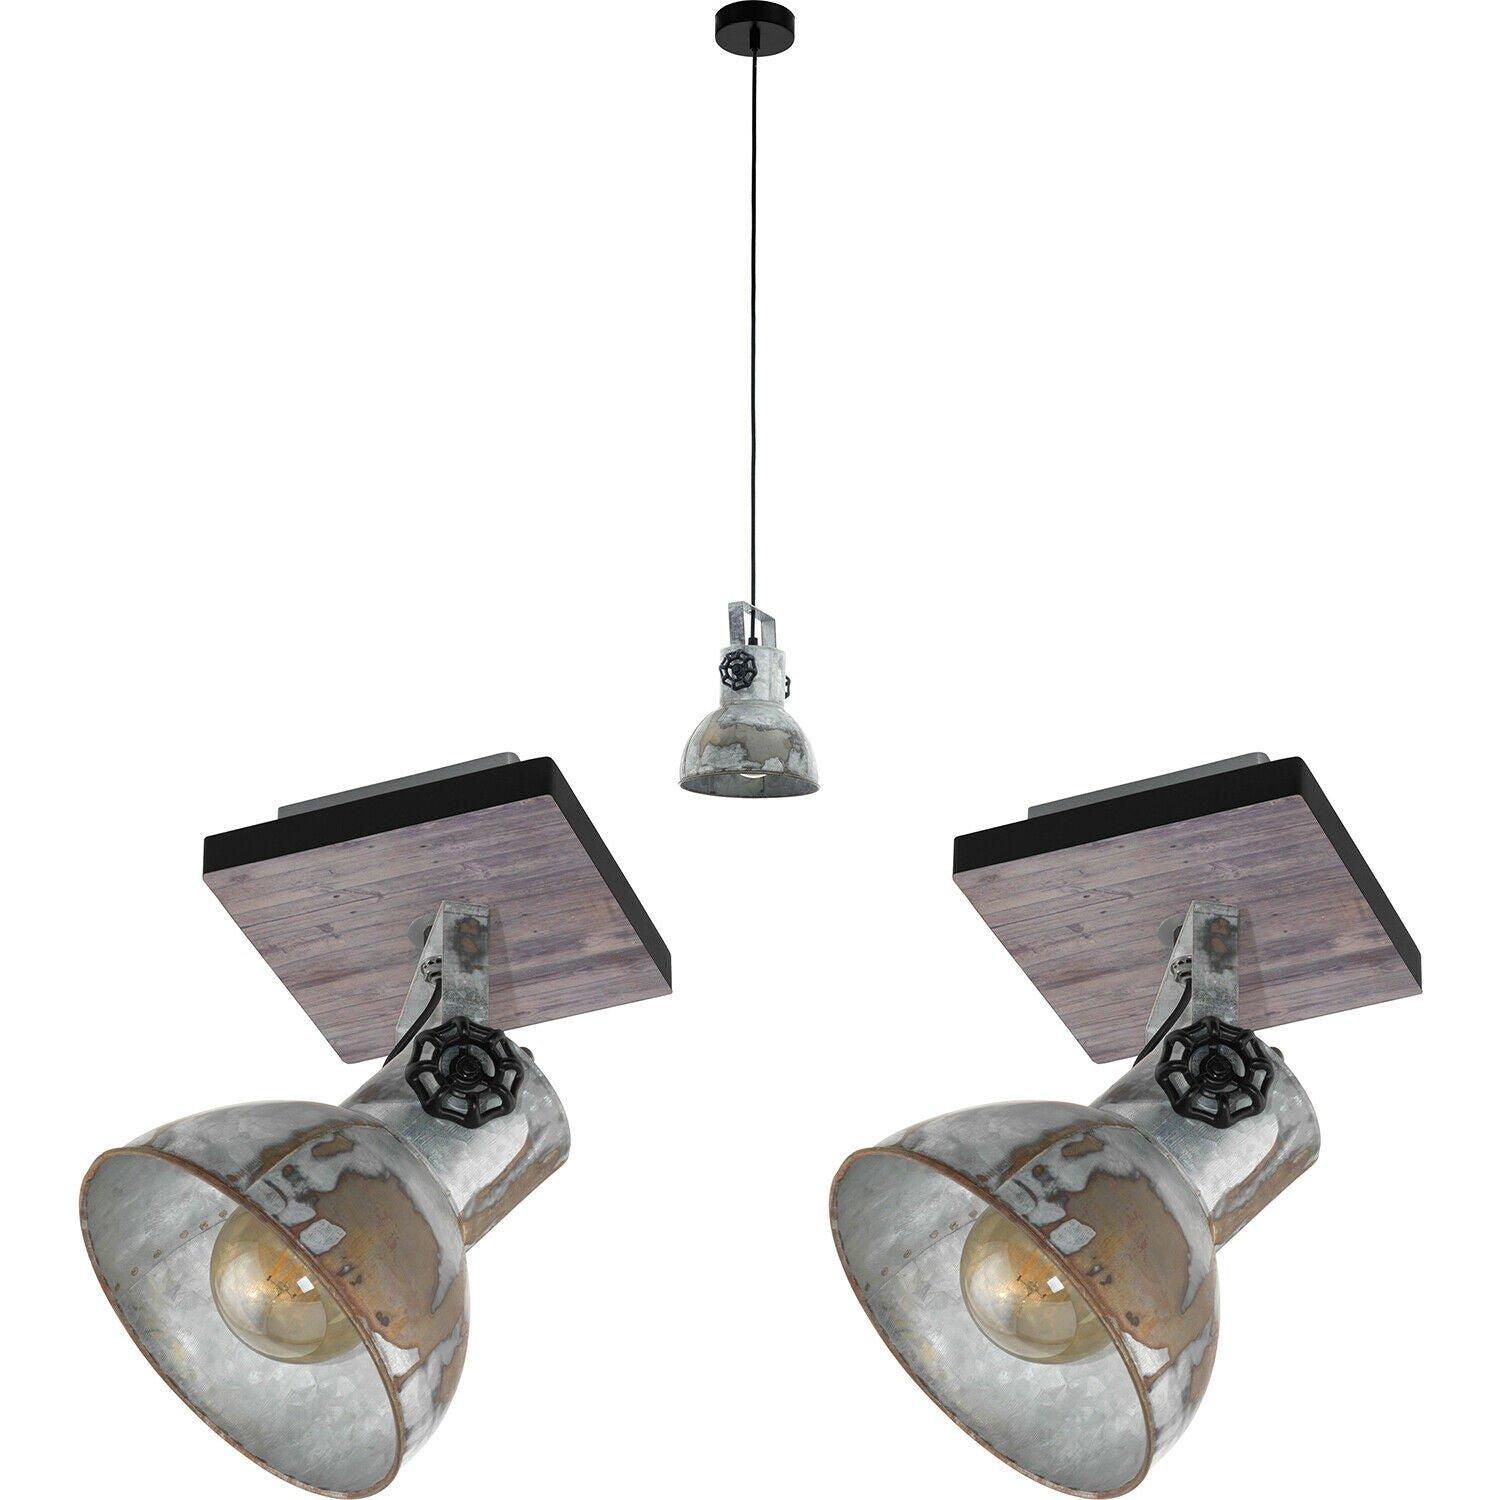 Ceiling Pendant Light & 2x Matching Wall Lights Industrial Raw Steel Lamp Shade